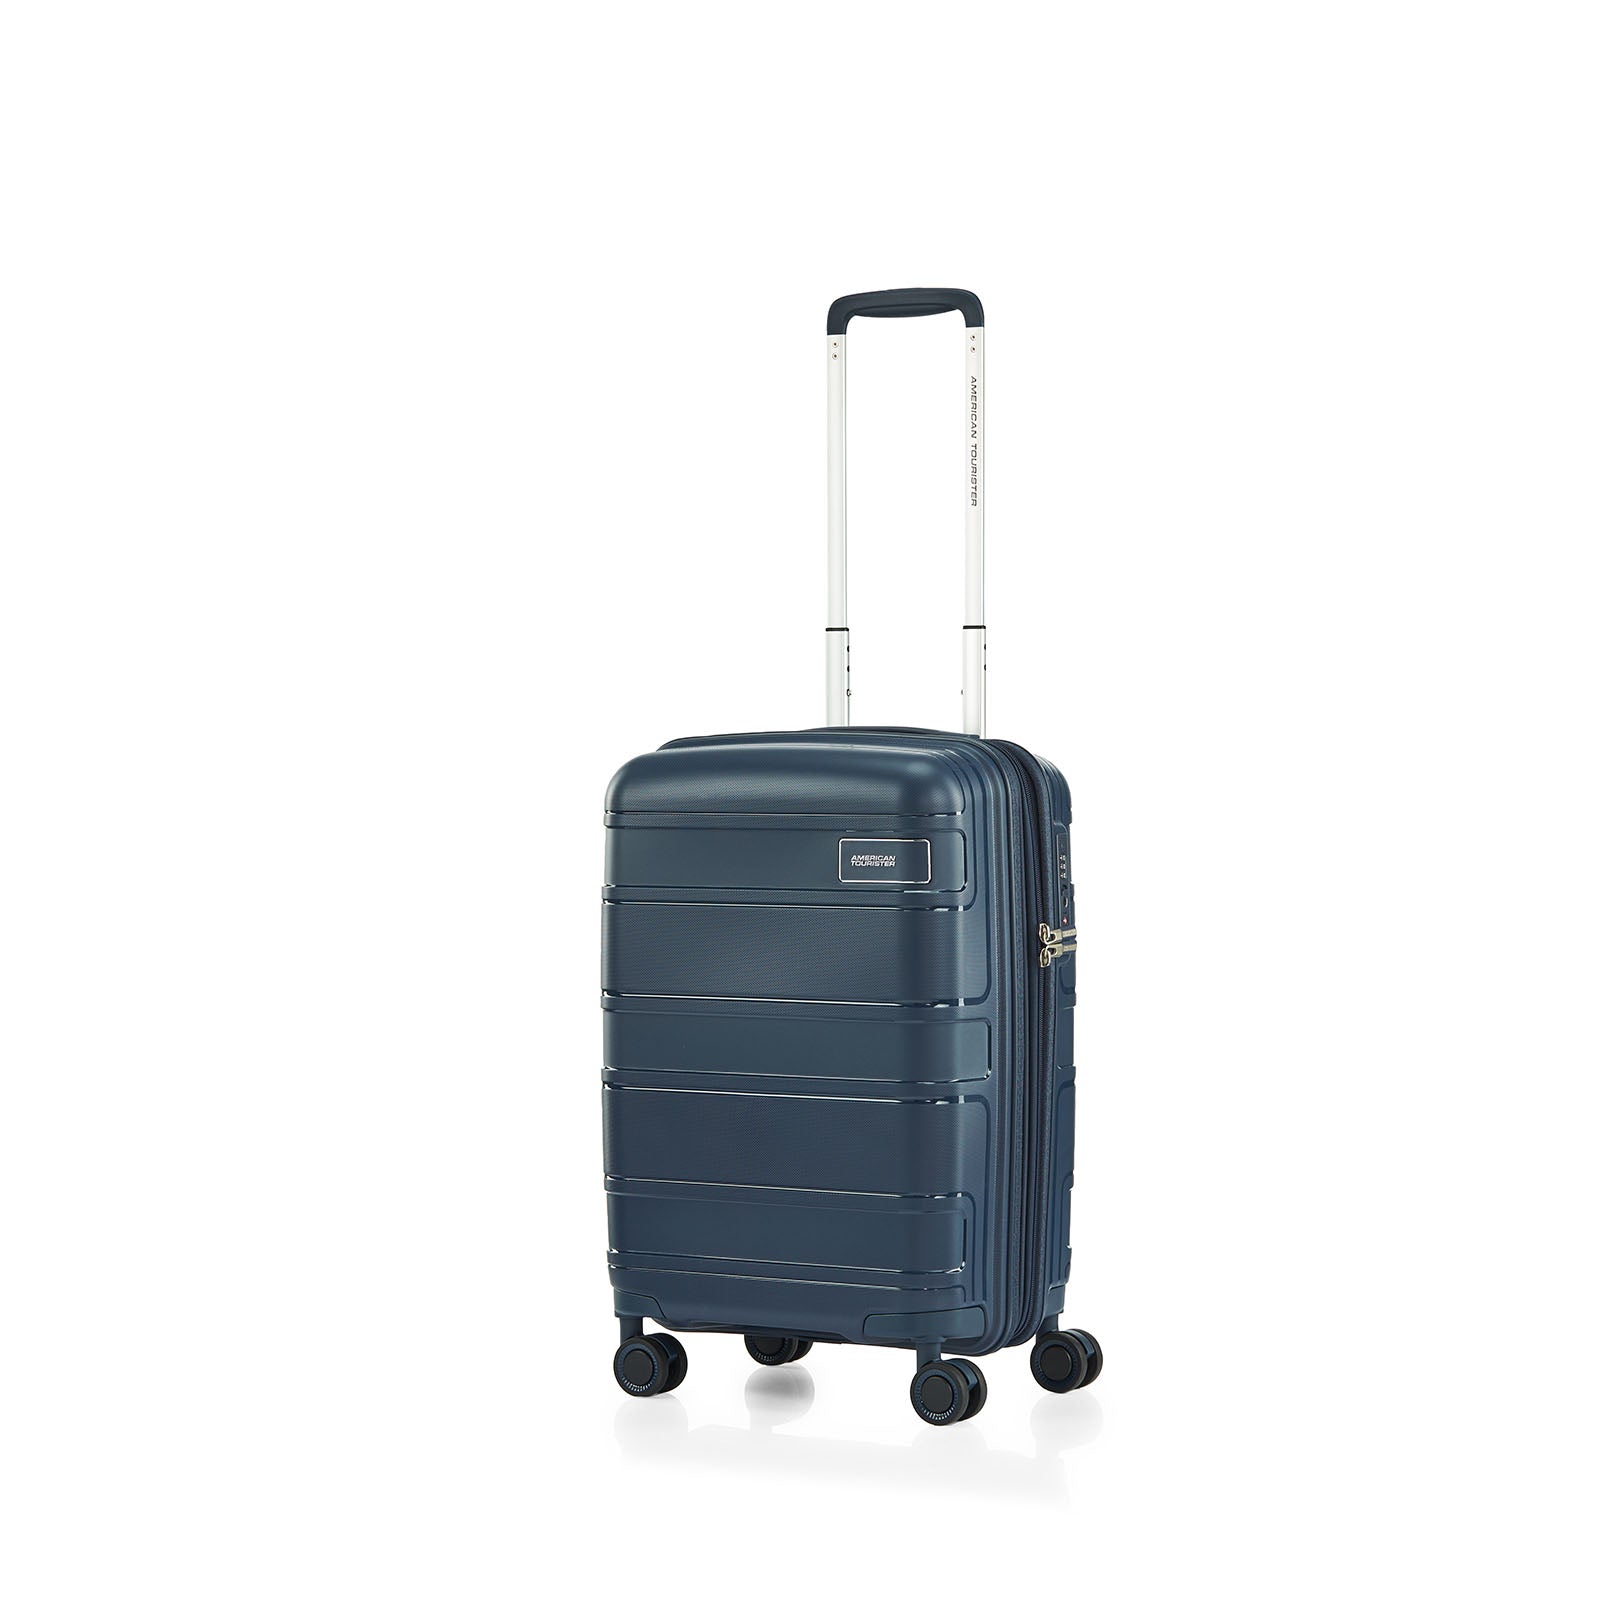 American-Tourister-Light-Max-55cm-Carry-On-Suitcase-Navy-Front-Angle